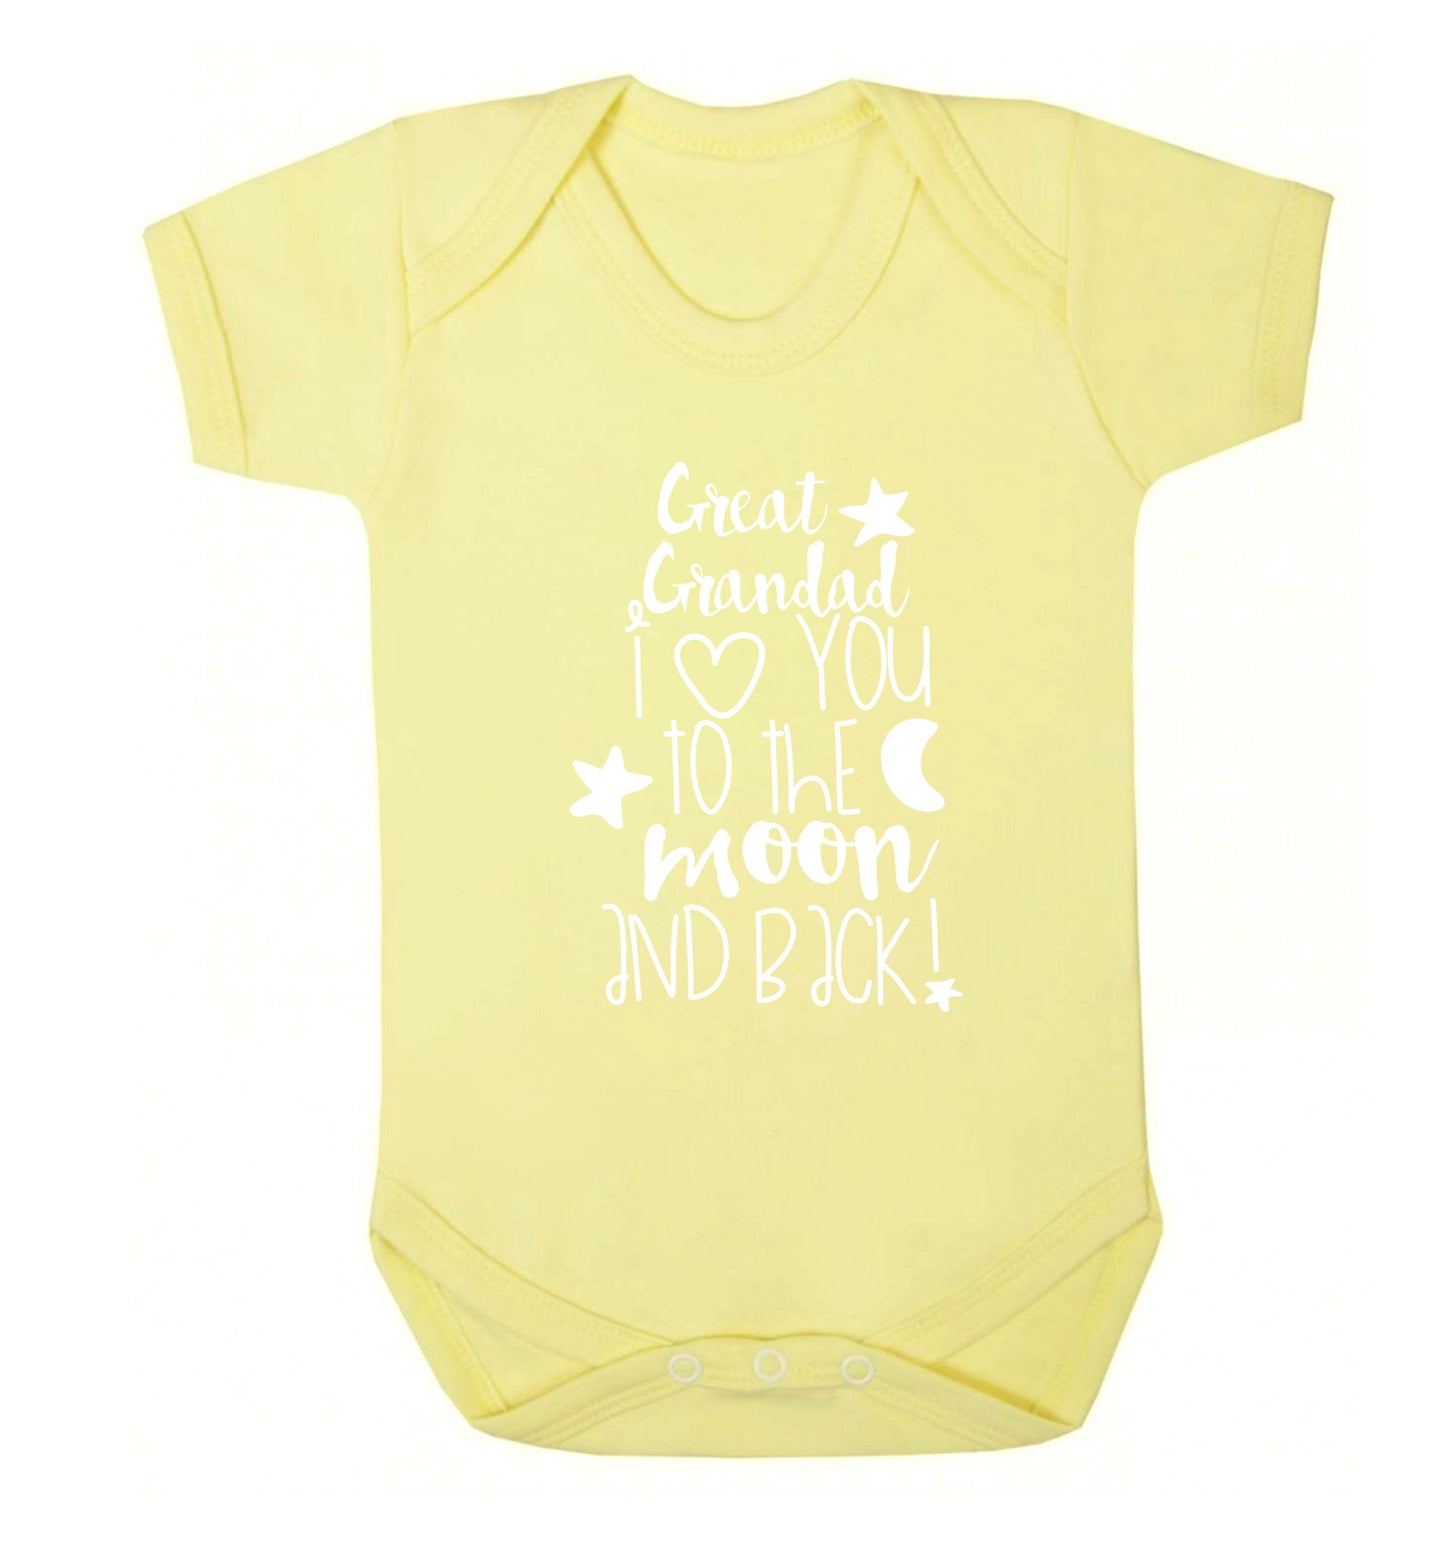 Great Grandad I love you to the moon and back Baby Vest pale yellow 18-24 months